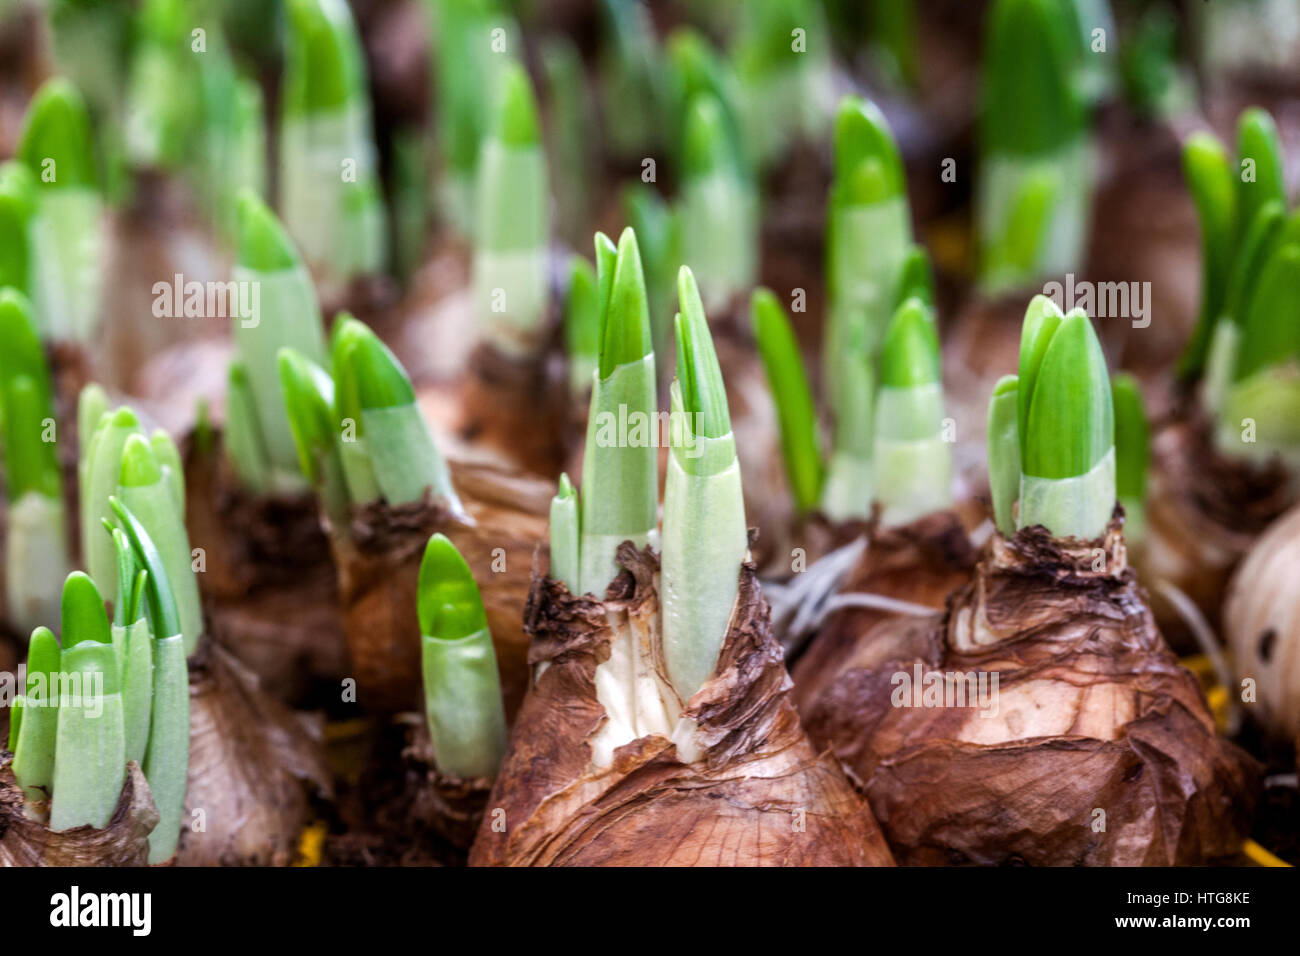 The budding daffodils bulbs spring bulbs Early spring Planting daffodils Narcissus Growing Shoots Budding Daffodils Bulbs Spring bulbs Plants Bulbous Stock Photo